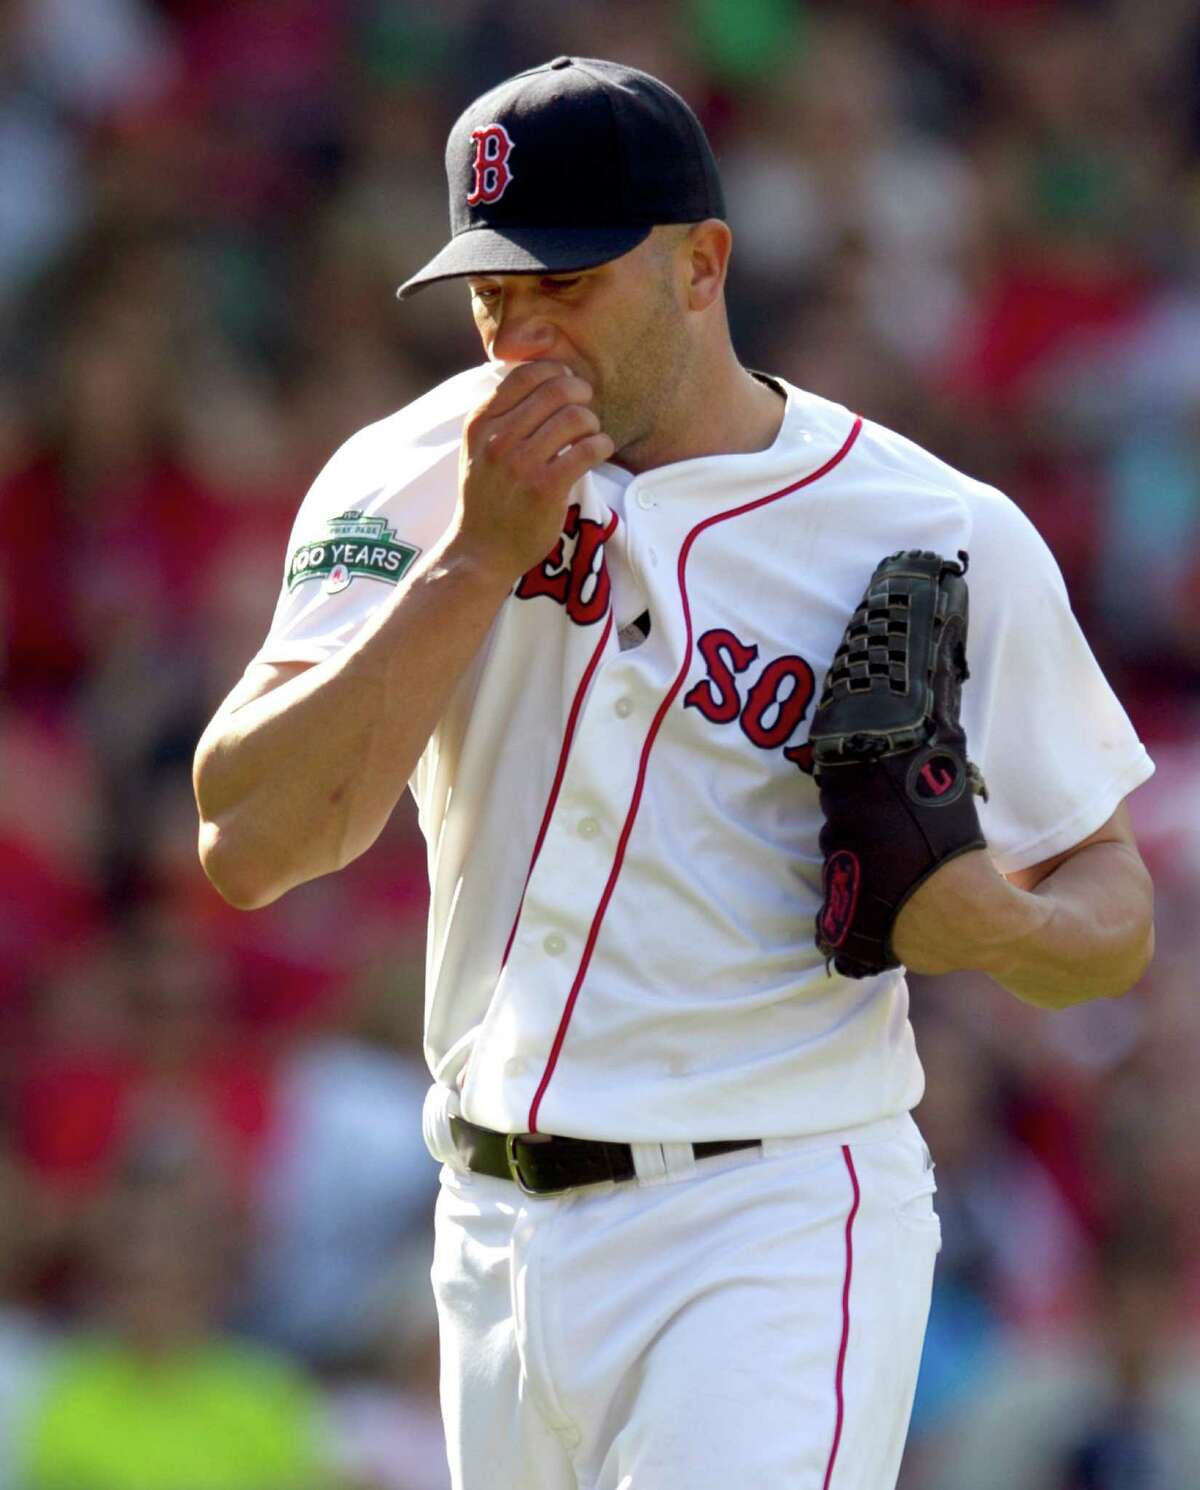 Boston Red Sox pitcher Alfredo Aceves wipes his face on his jersey as he steps off the mound after giving up two runs to the Tampa Bay Rays in the ninth inning of a baseball game at Fenway Park in Boston, Sunday, May 27, 2012. The Rays won 4-3. (AP Photo/Steven Senne)